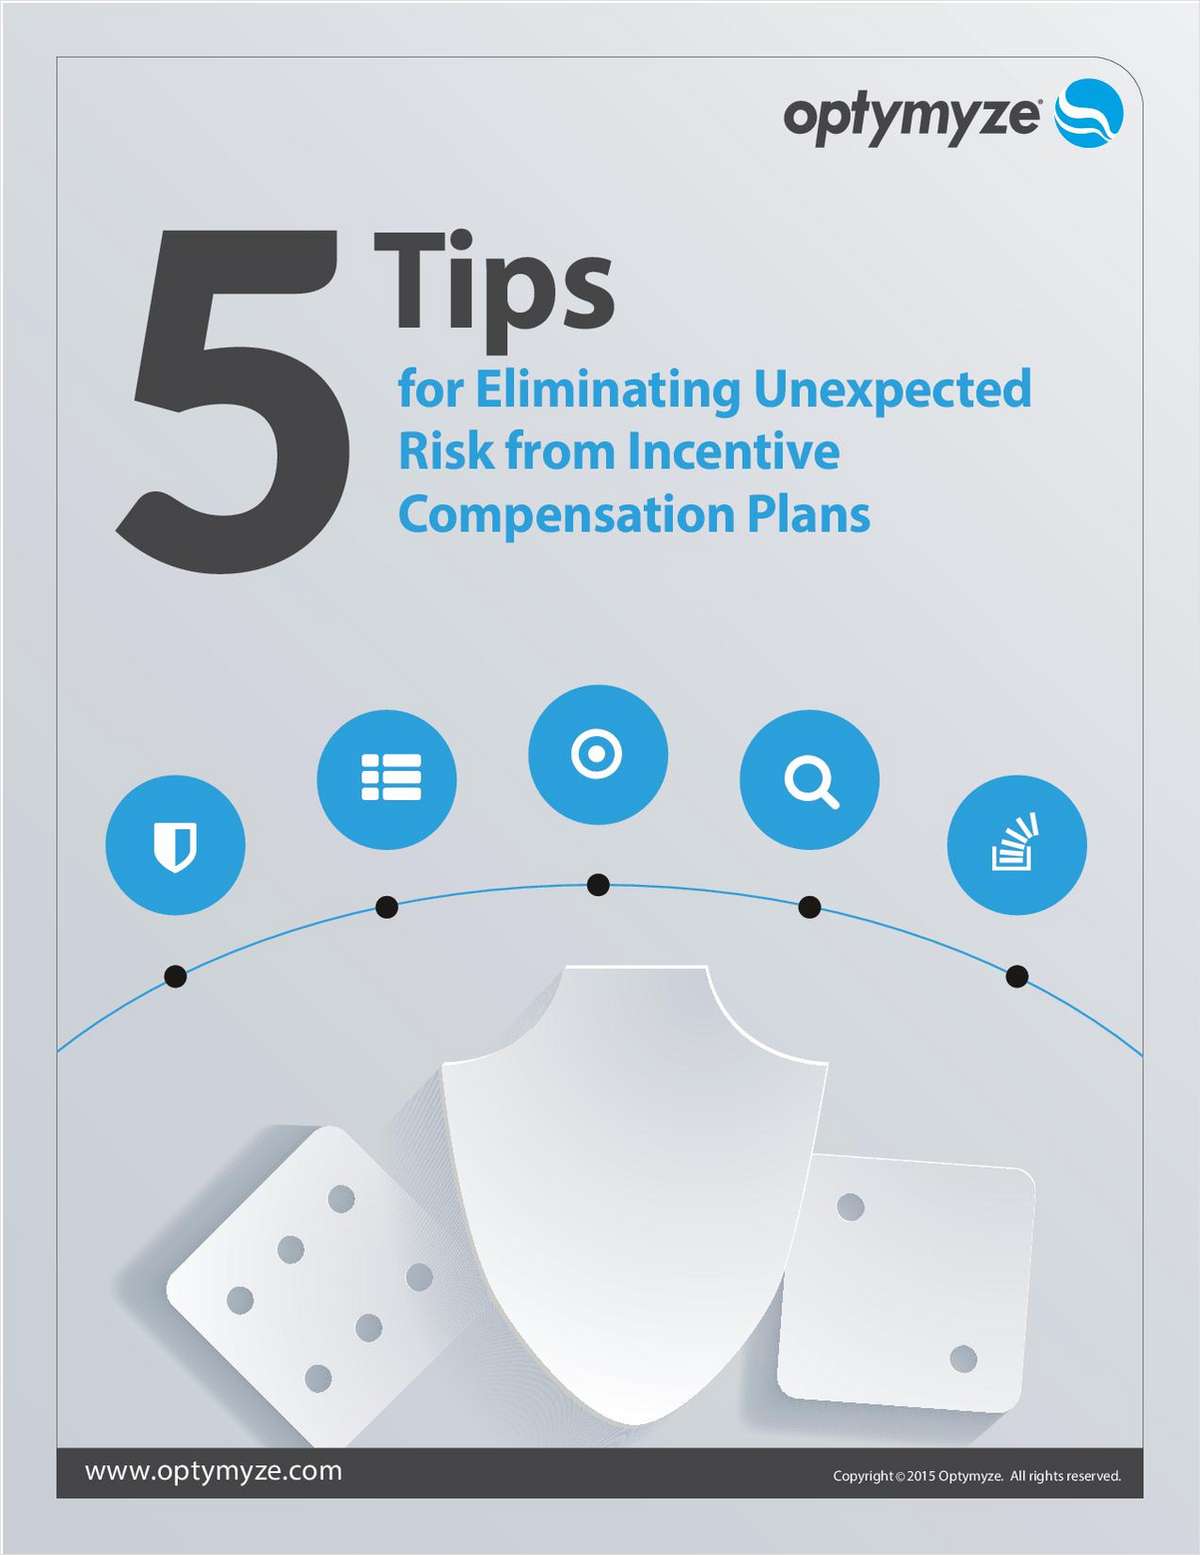 5 Tips for Eliminating Unexpected Risk from Incentive Compensation Plans